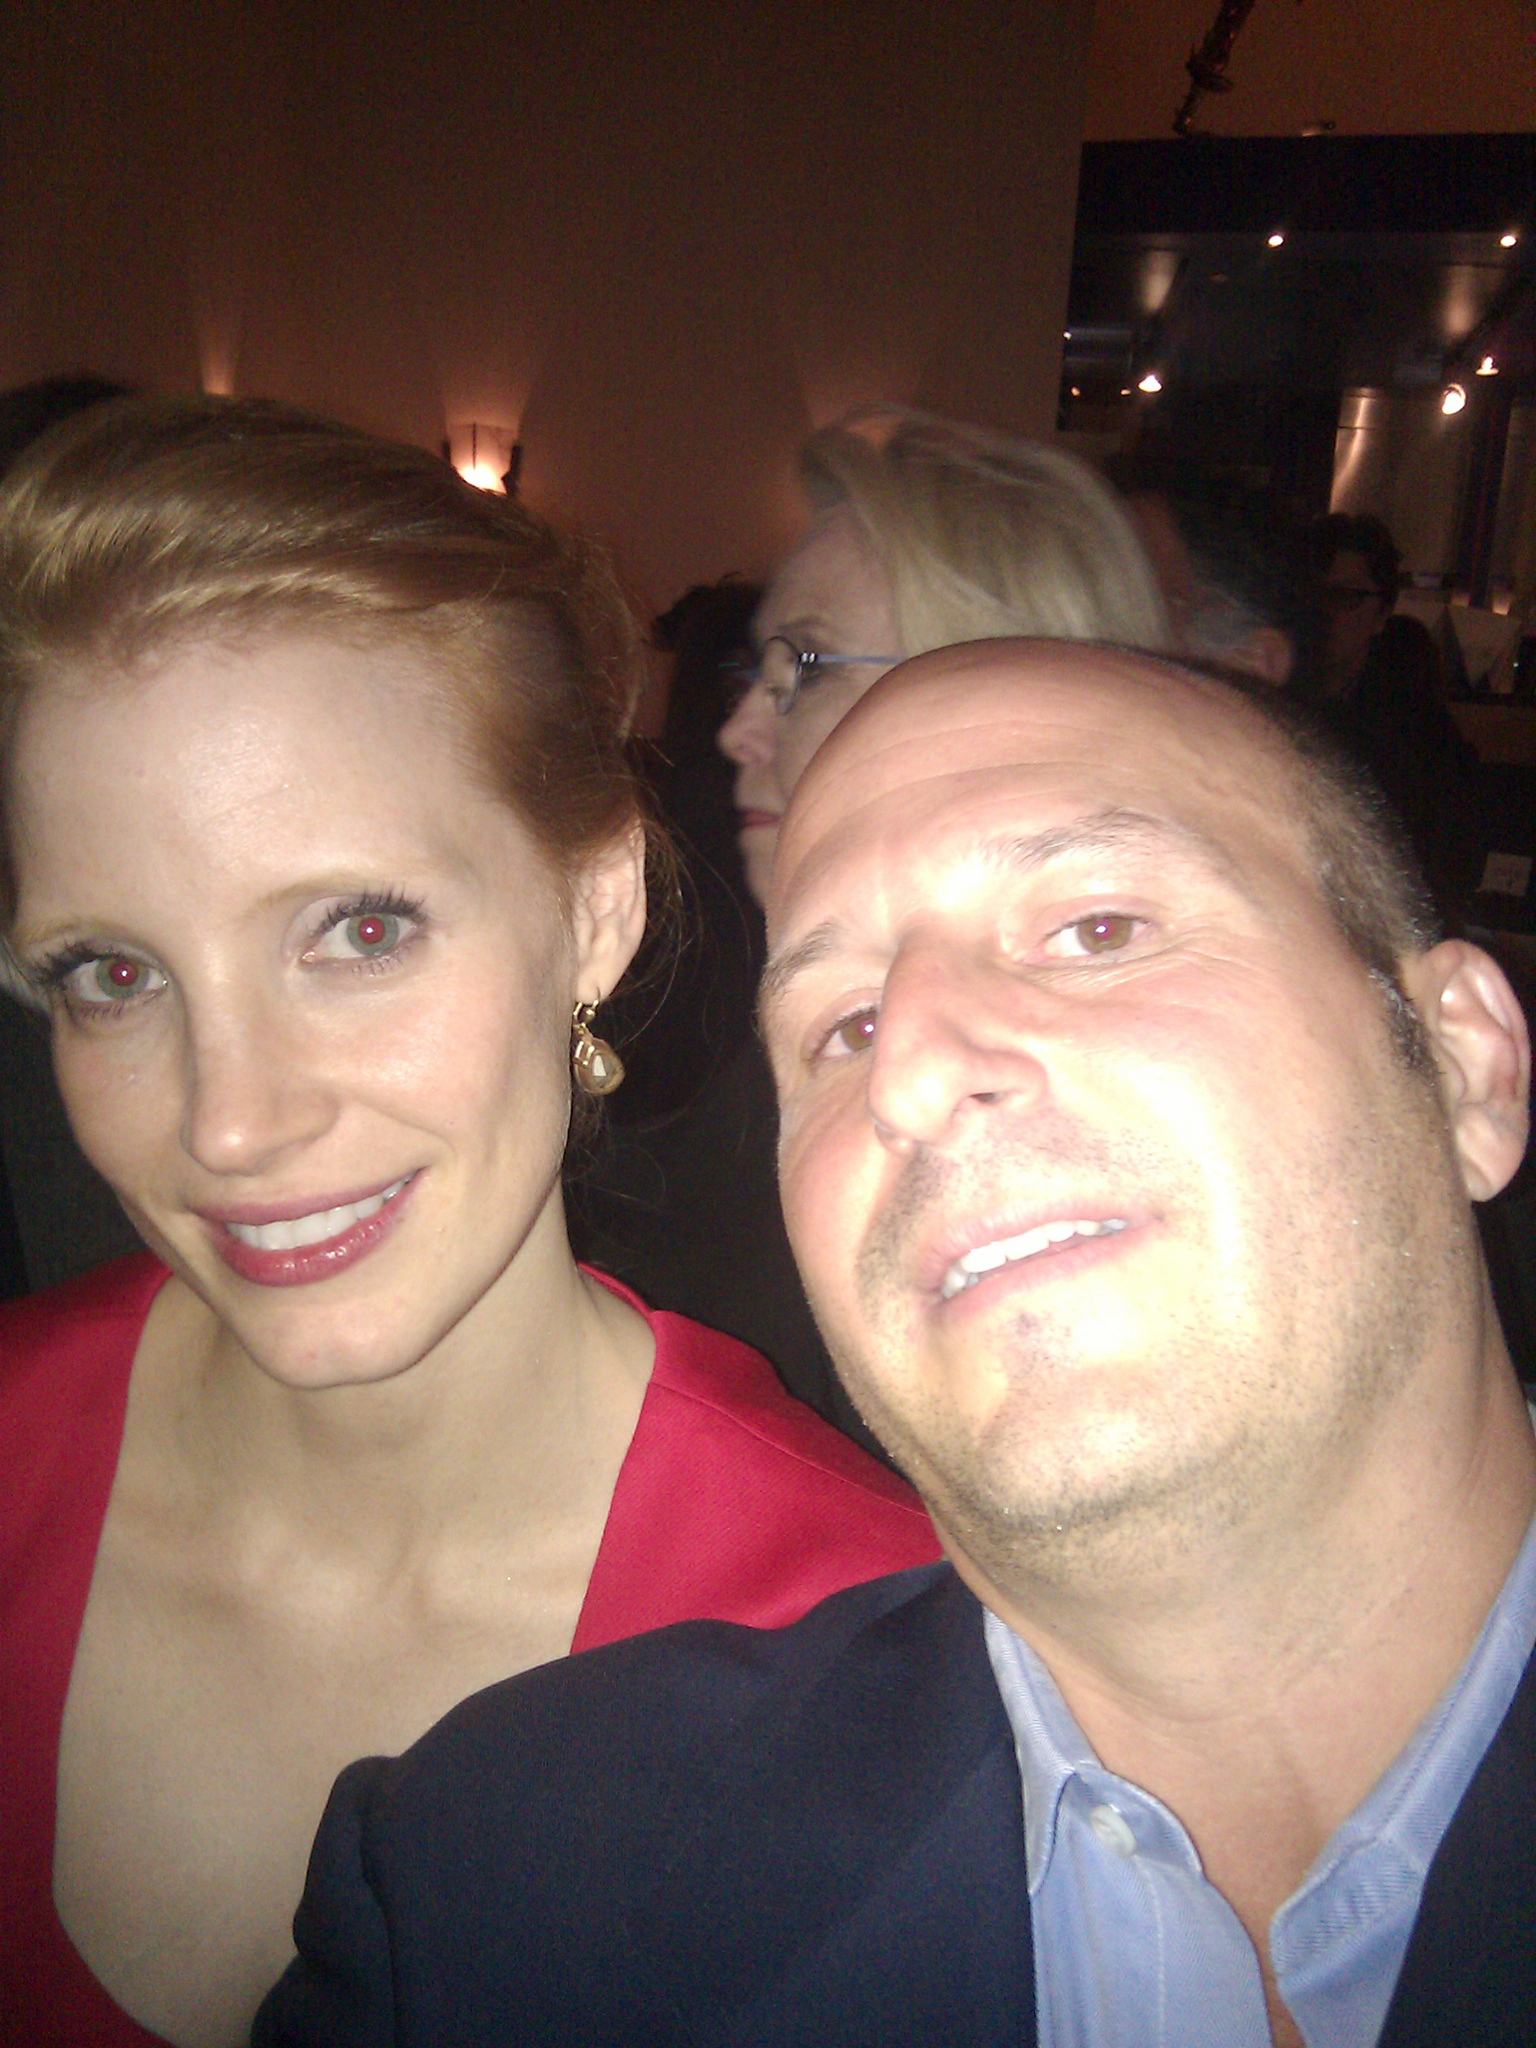 Todd Blatt(ME) and Jessica Chastain at the premier of wilde solome at M.O.M.A IN NYC!!